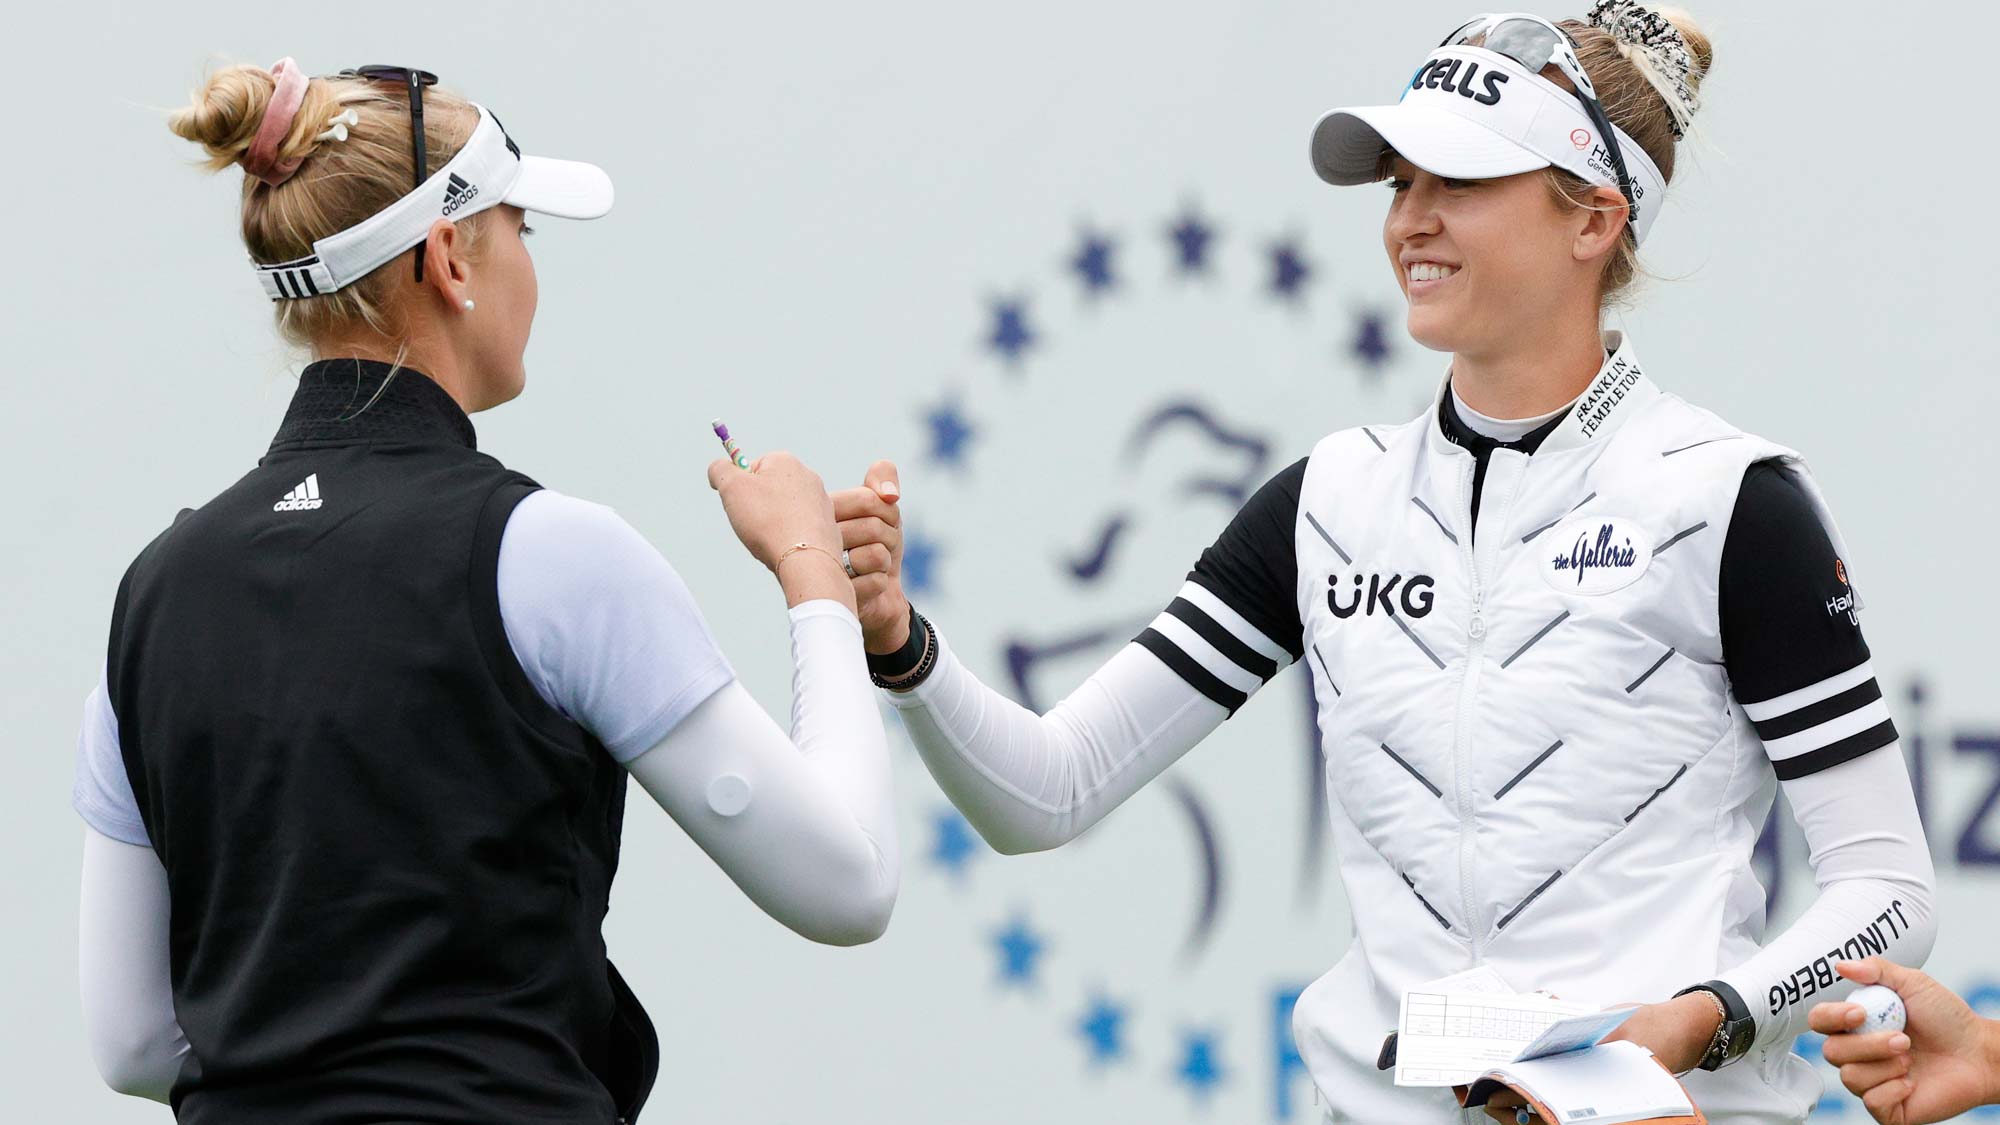 Nelly Korda of the United States (R) fist-bumps her sister Jessica Korda after both played the 18th hole during the third round of the Cognizant Founders Cup